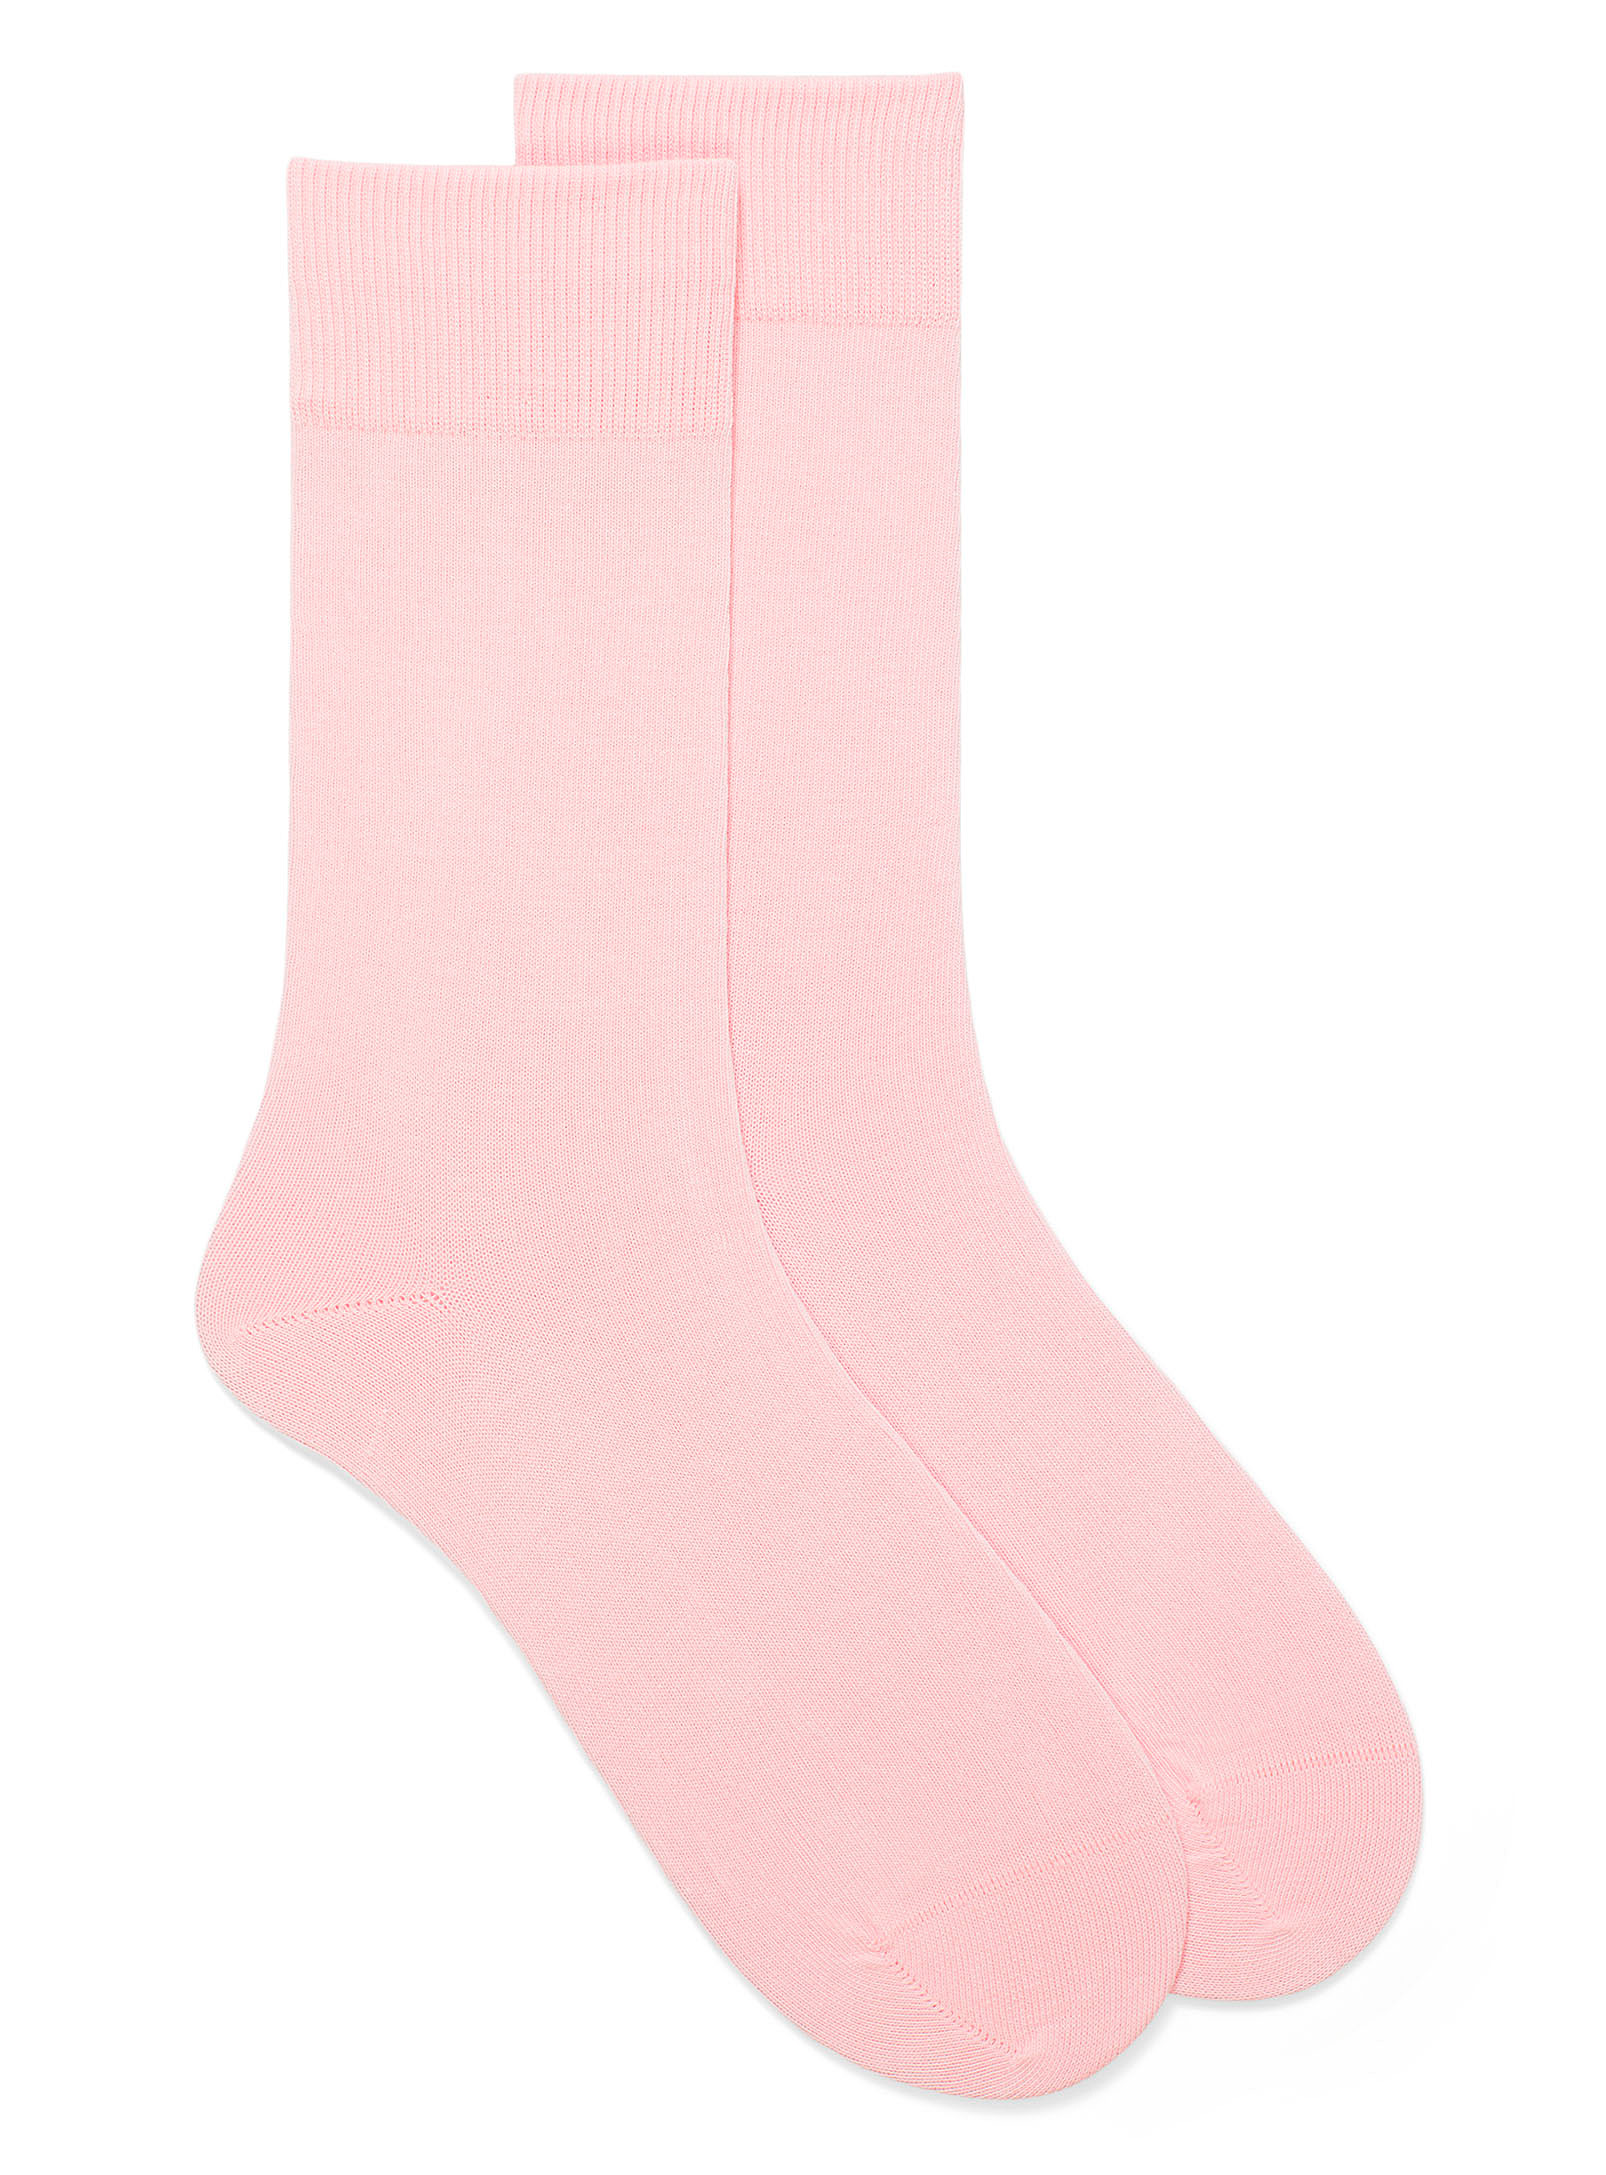 Le 31 Essential Organic Cotton Socks In Pink